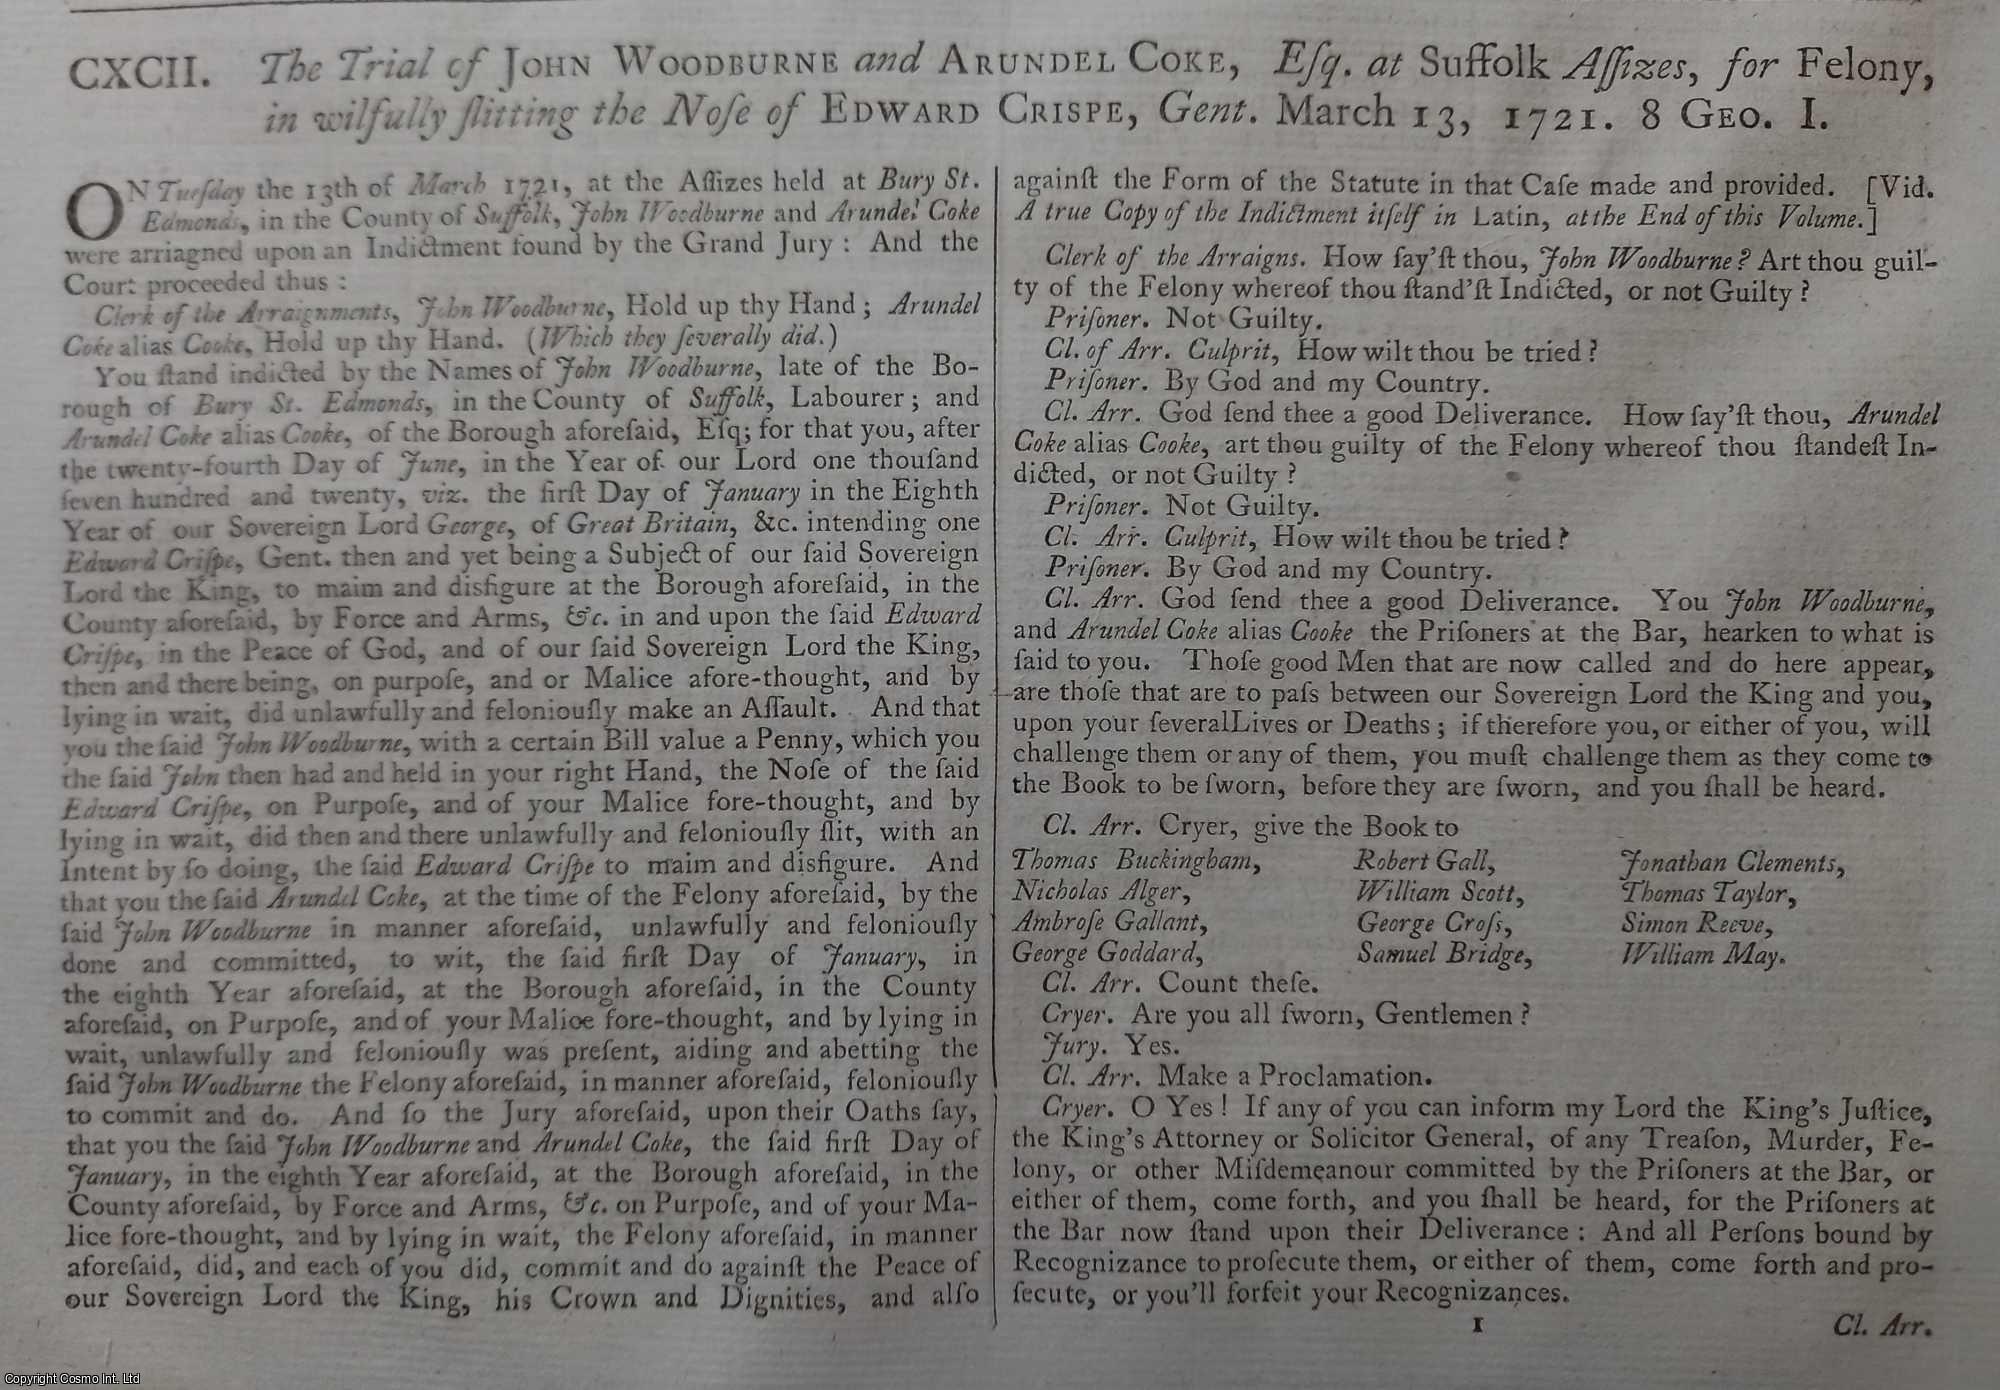 [Trial] - COVENTRY ACT CONVICTION.The Trial of John Woodburne and Arundel Coke, Esq: at Suffolk Assizes for felony, in wilfully slitting the Nose of Edward Crispe, Gent. March 13, 1721. An original article from the Collected State Trials.